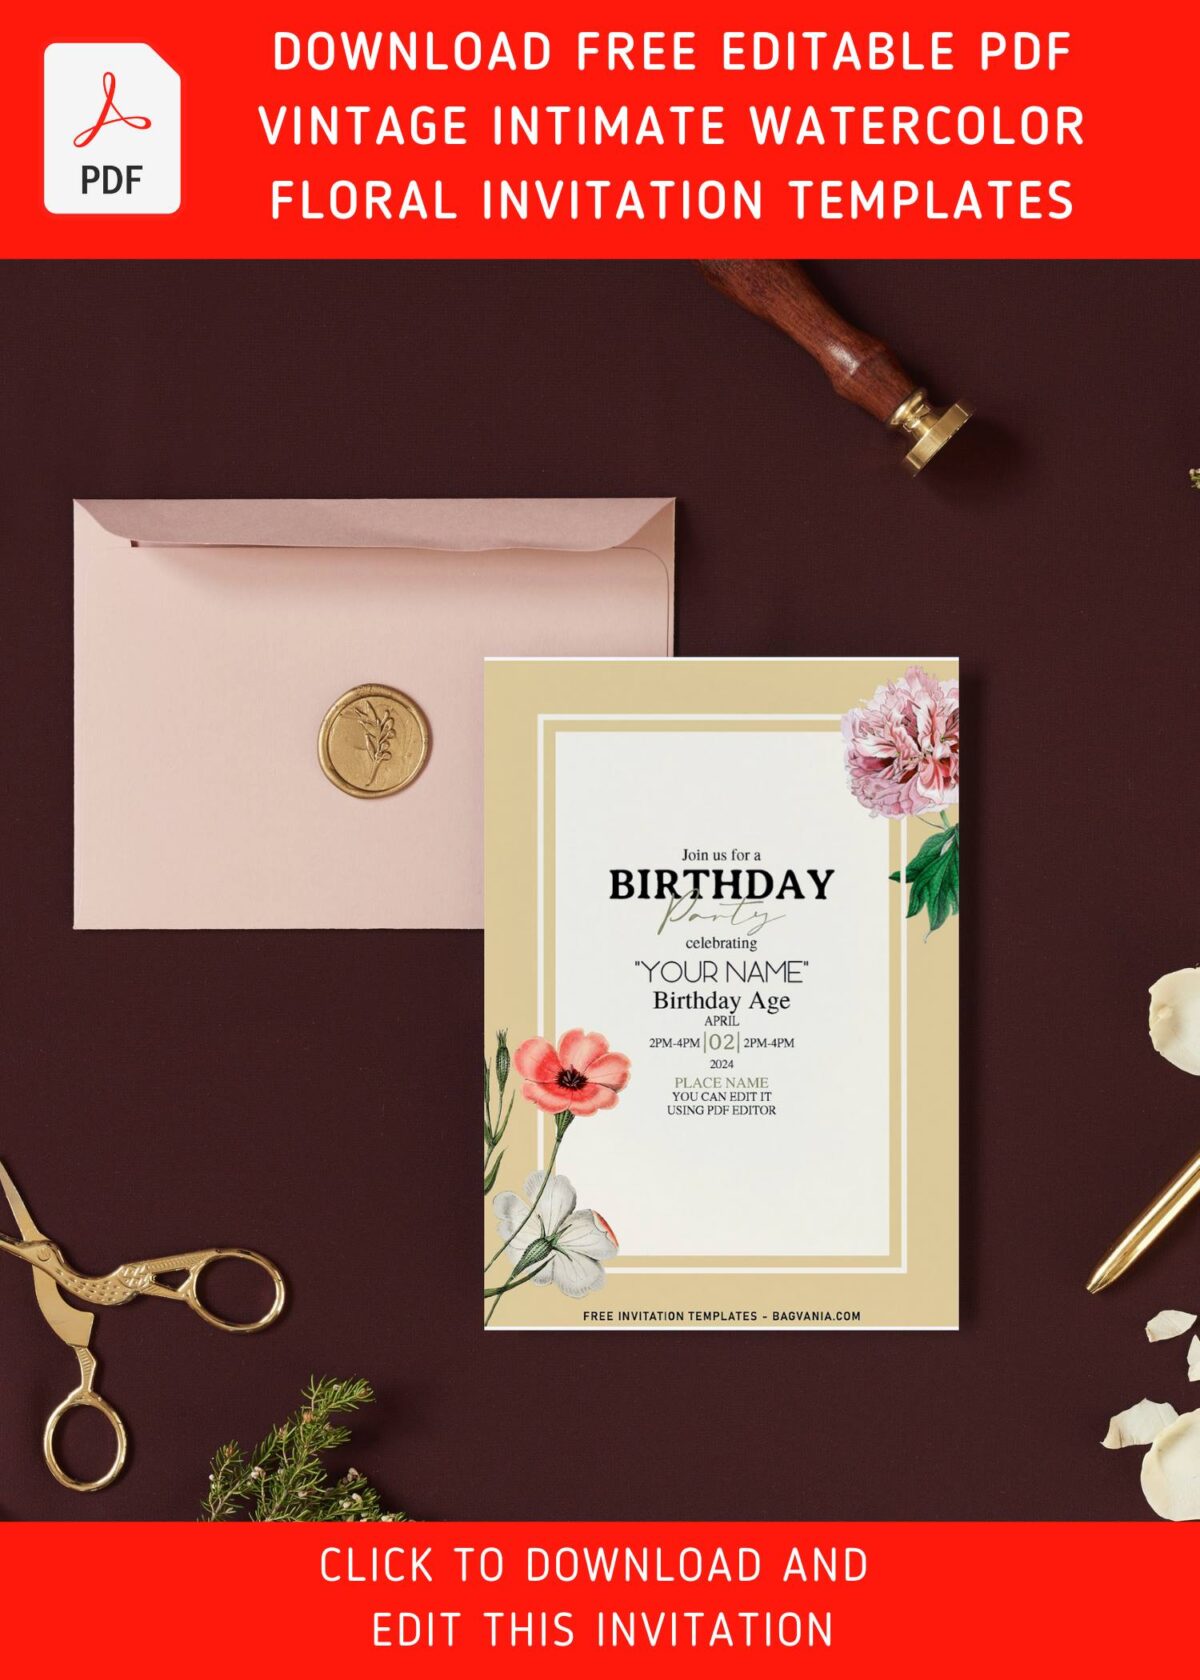 (Free Editable PDF) Intimate Blush Paper Blooms Birthday Invitation Templates with gorgeous anemone